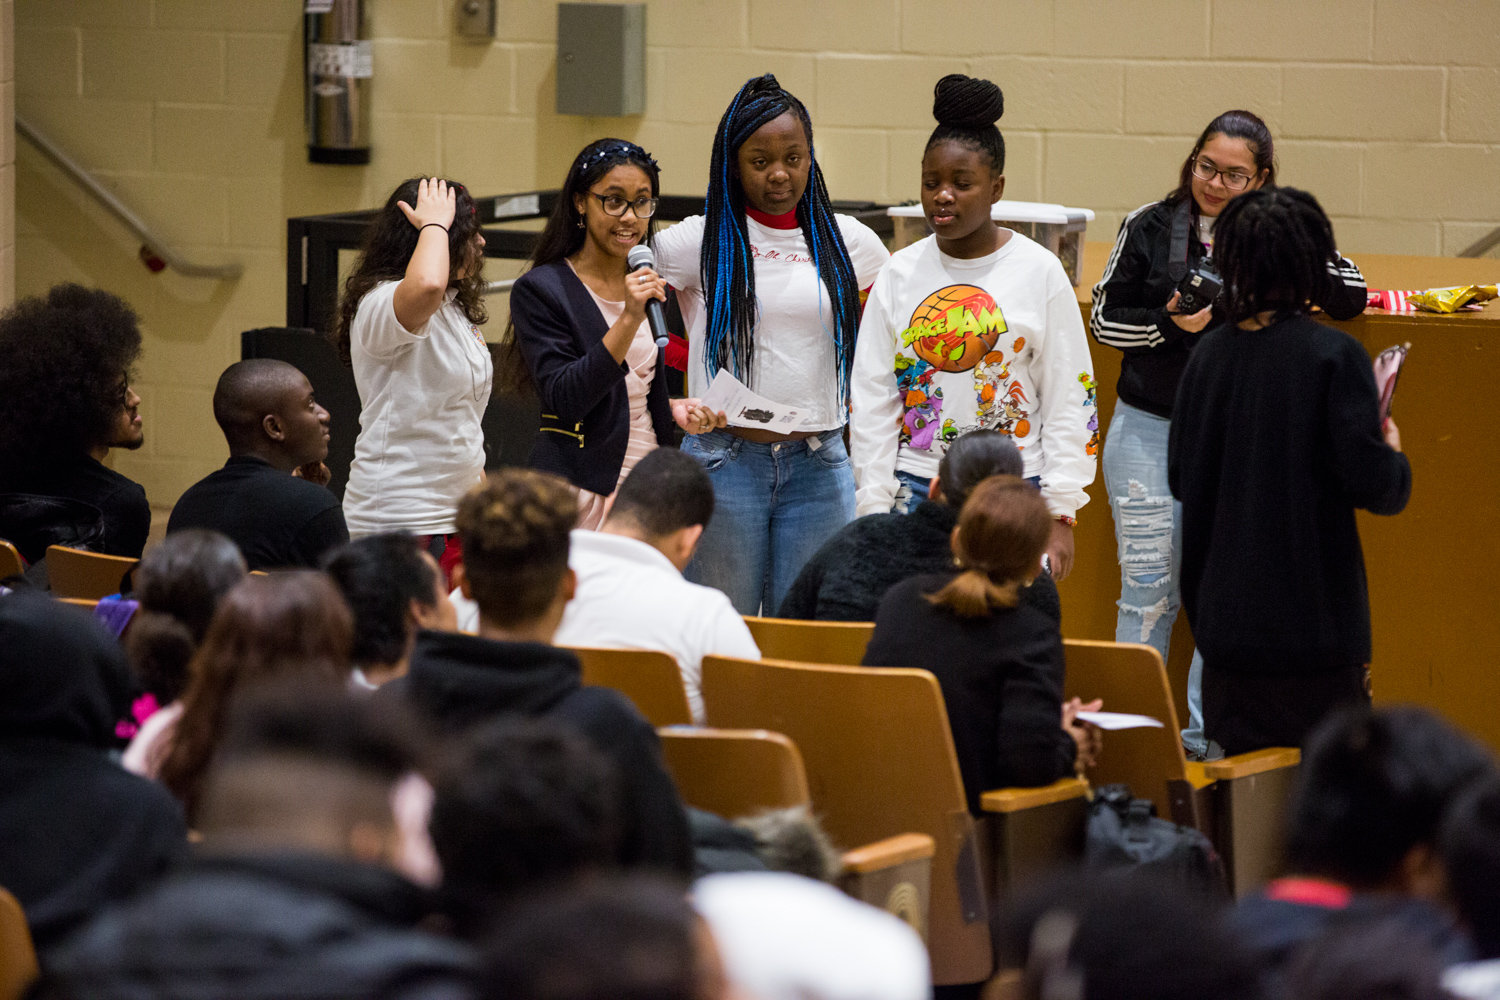 Students participate in an interactive poem for the Marble Hill School for International Studies’ second annual Black History Show, organized by the school’s new Black Student Union.